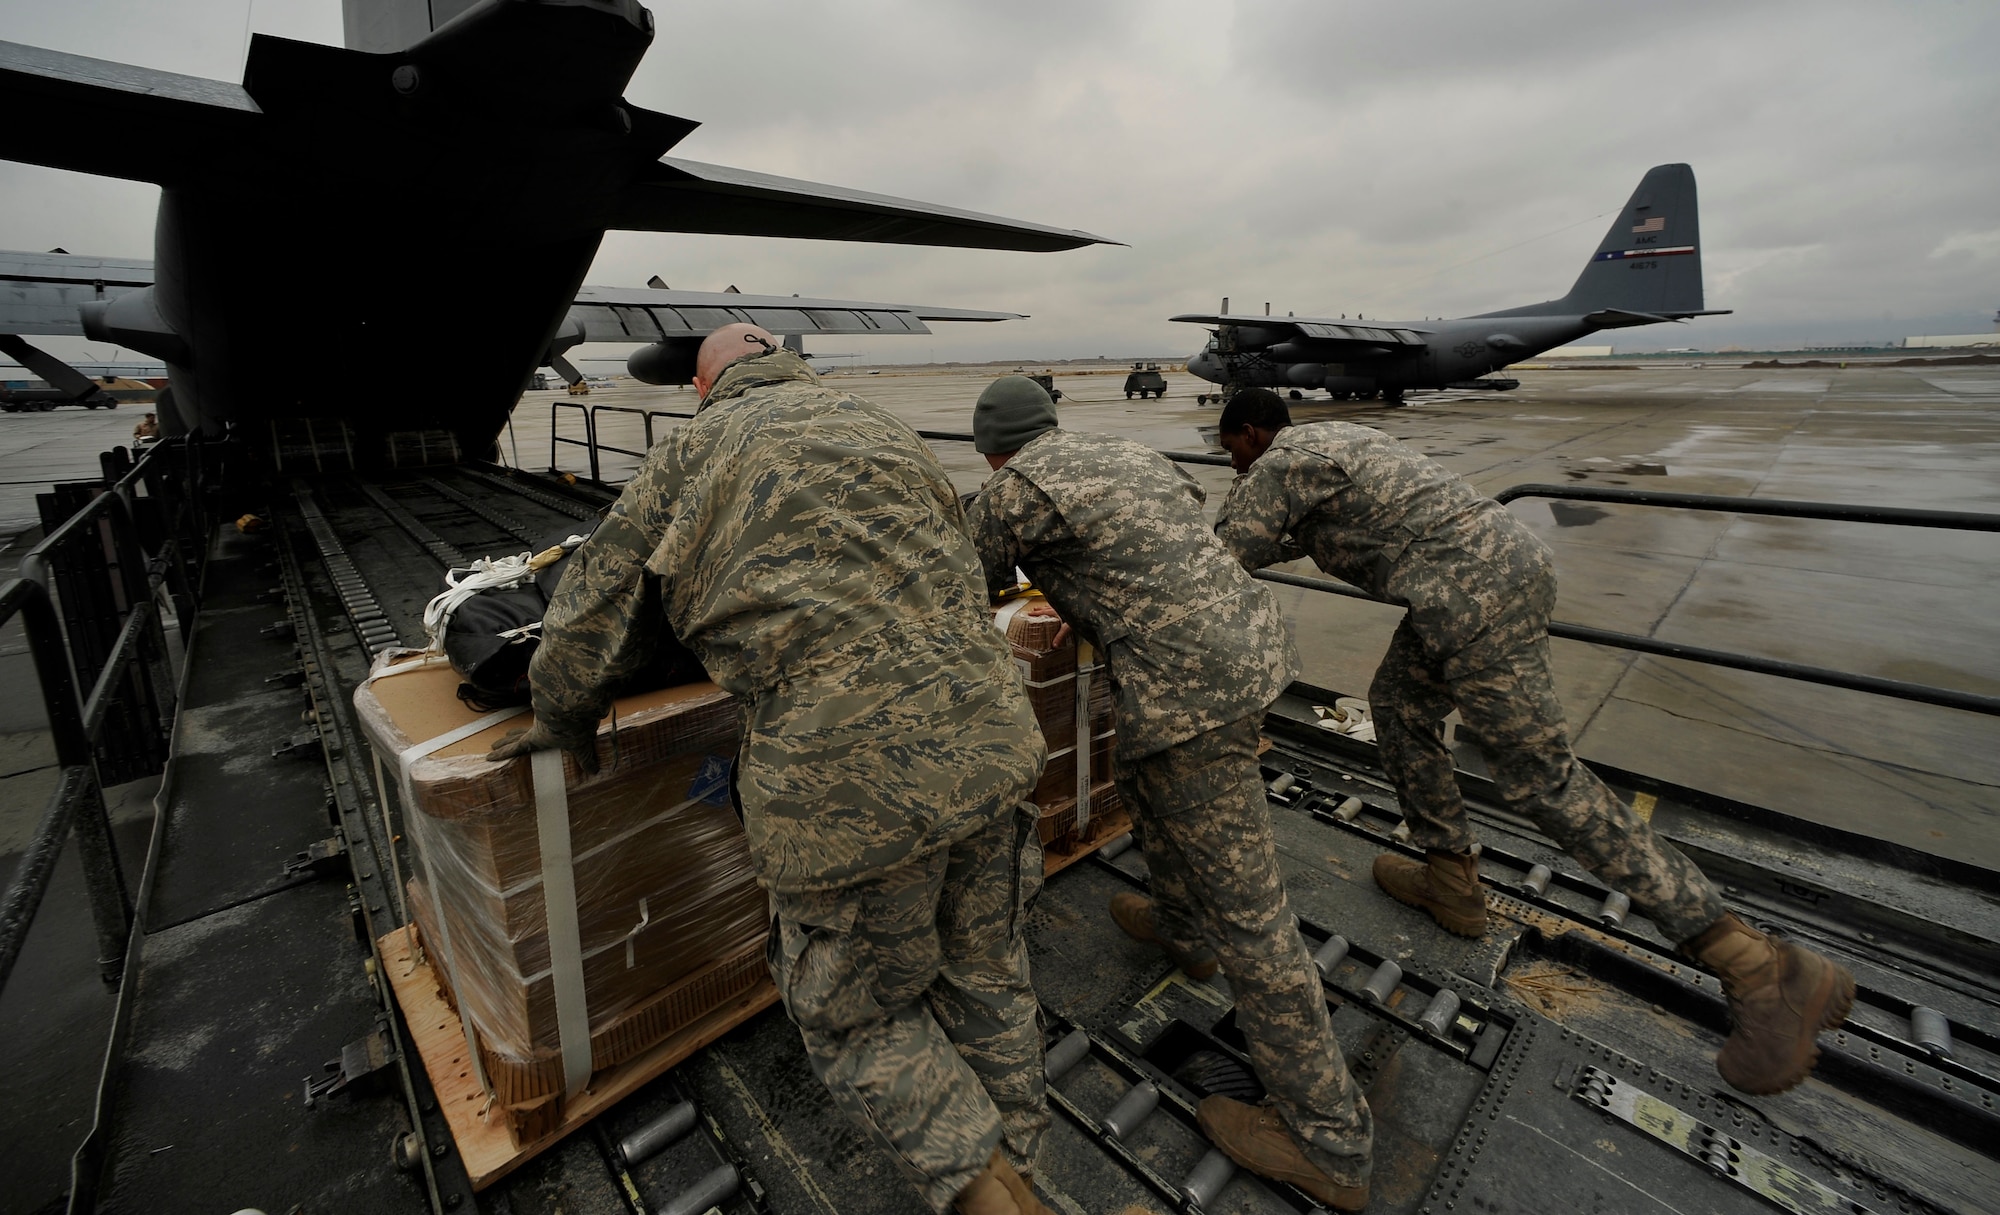 U.S. Air Force Airmen and two U.S. Army soldiers deployed to Bagram Airfield, Afghanistan, load, a C-130H Hercules with low-cost low-altitude resupply bundles, Feb. 6, 2010. This mission marked the first time an Air Force C-130 crew airdropped LCLA bundles in a combat zone.  (U.S. Air Force photo/Staff Sgt. Angelita Lawrence/released)
